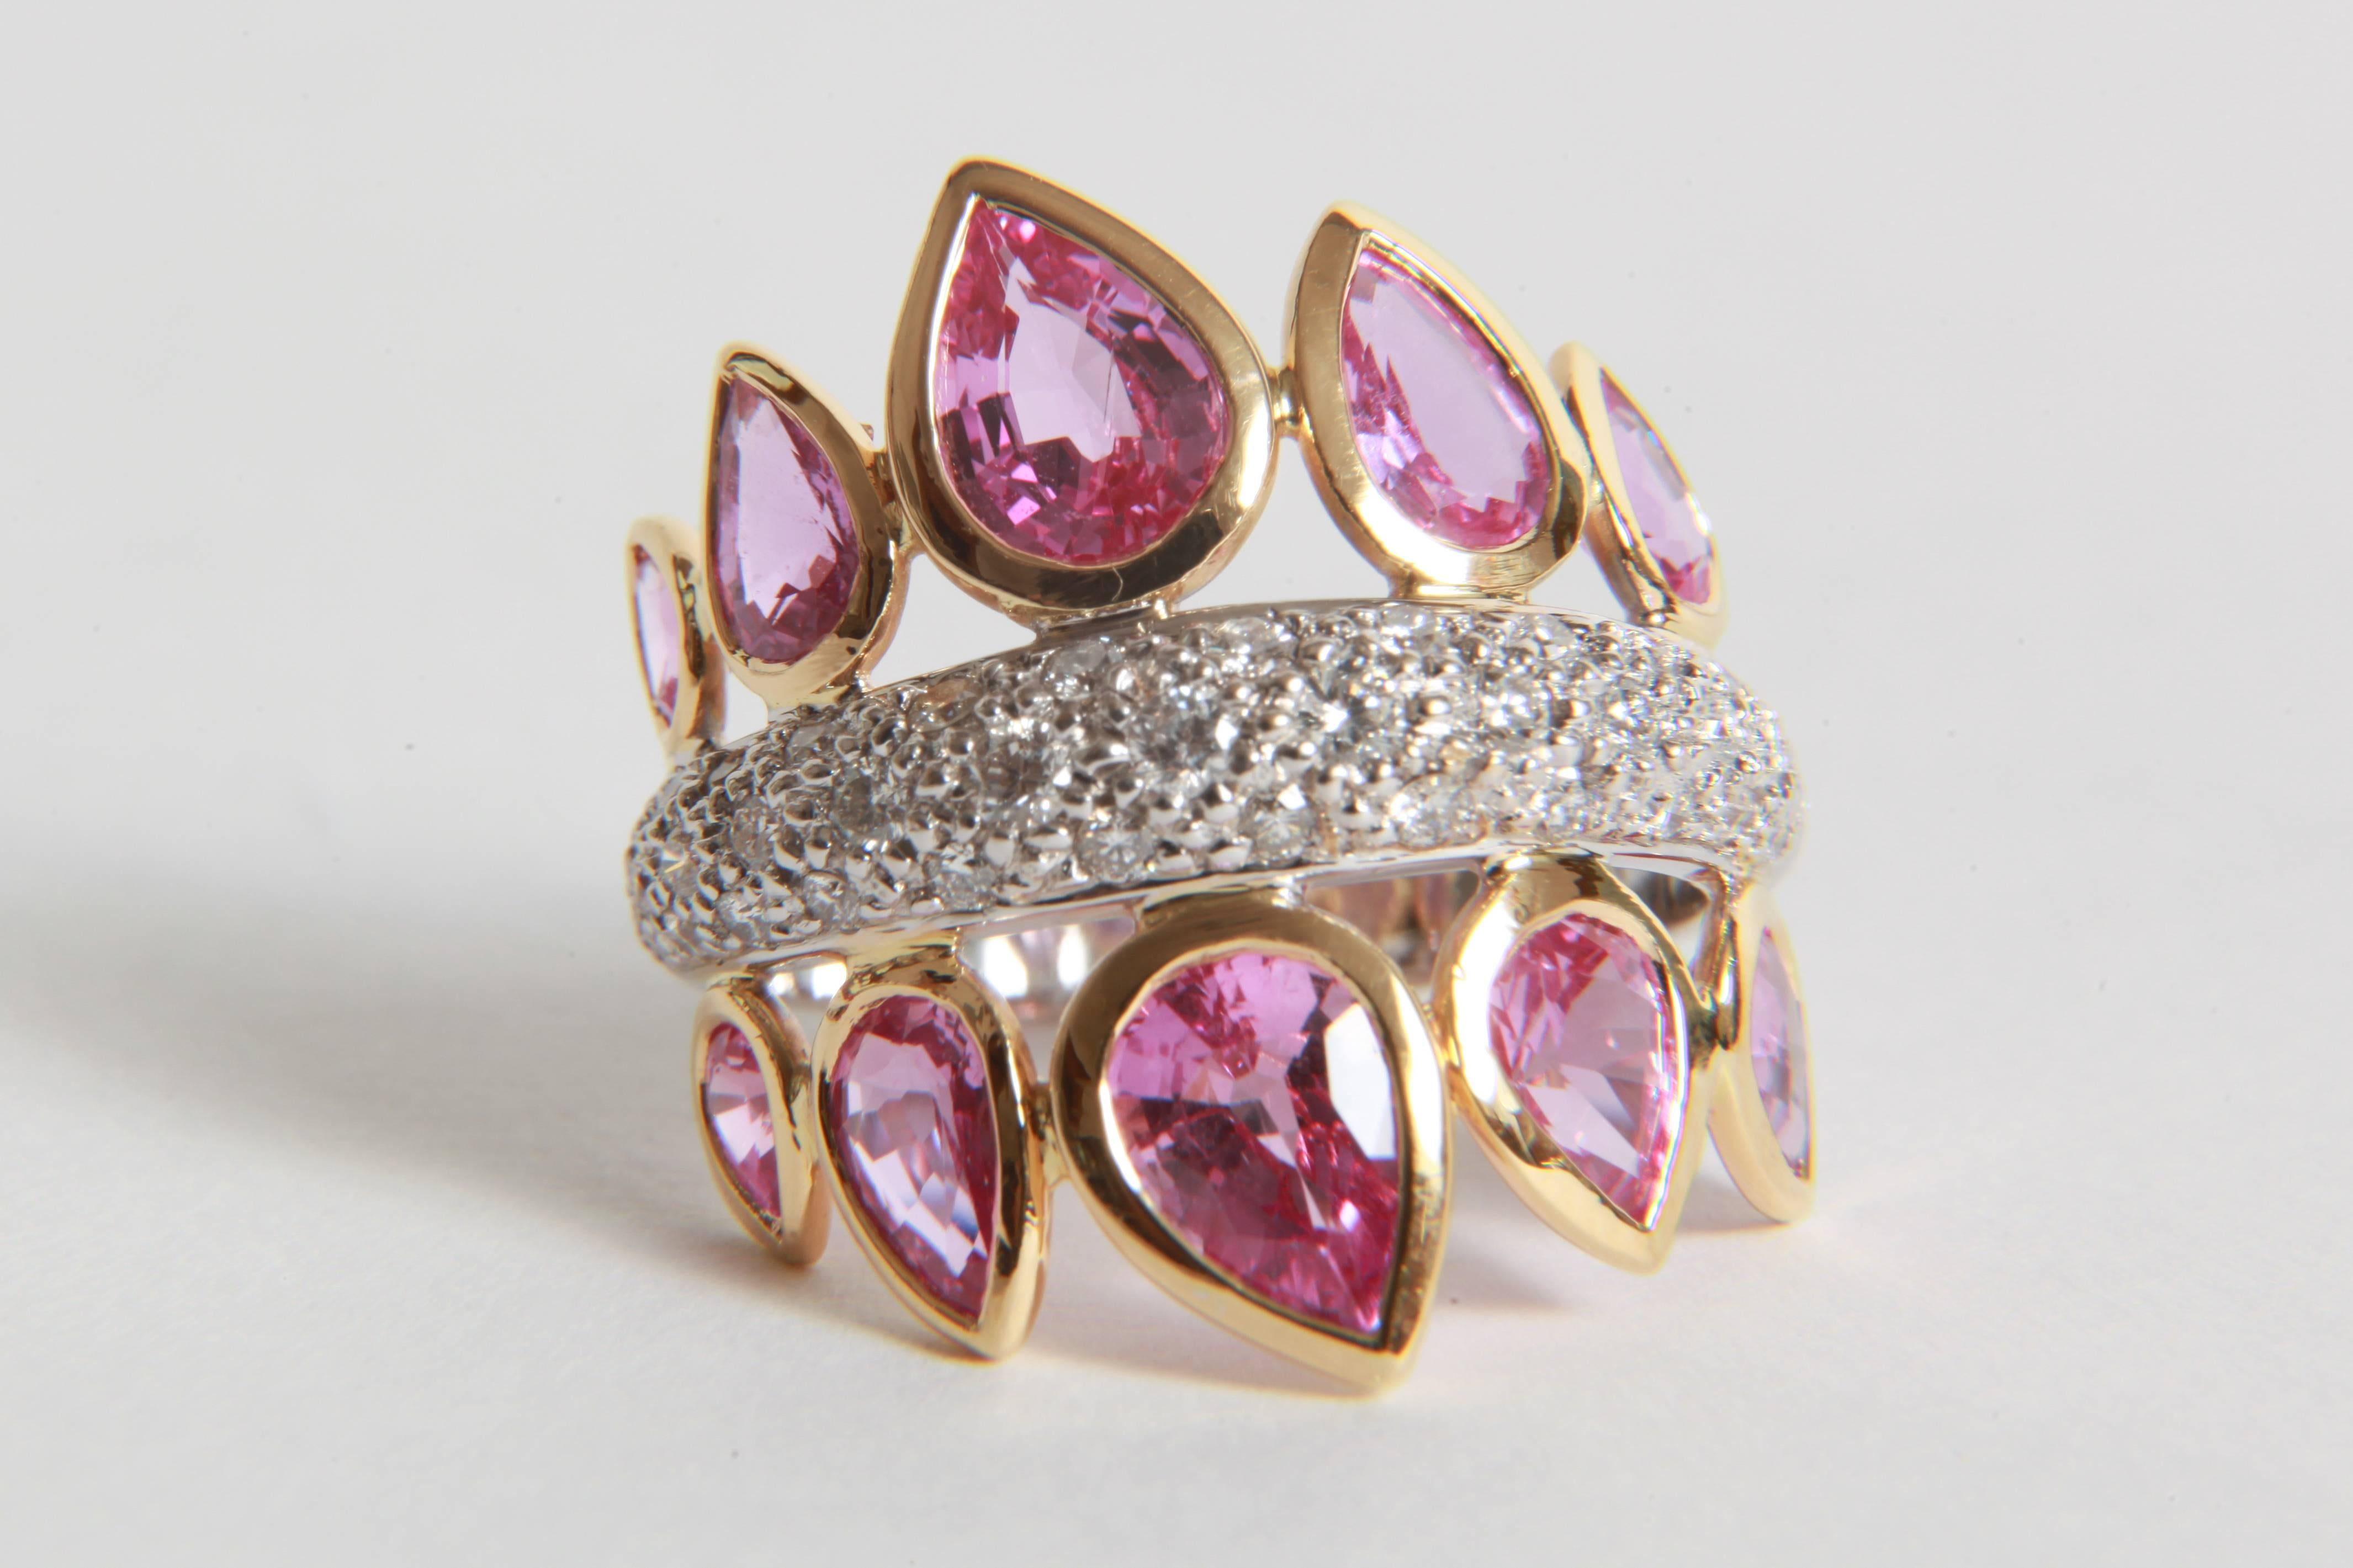 Pear Cut 4, 74 Carats Pink Sapphires and 1 Carat White Diamonds Ring by Marion Jeantet